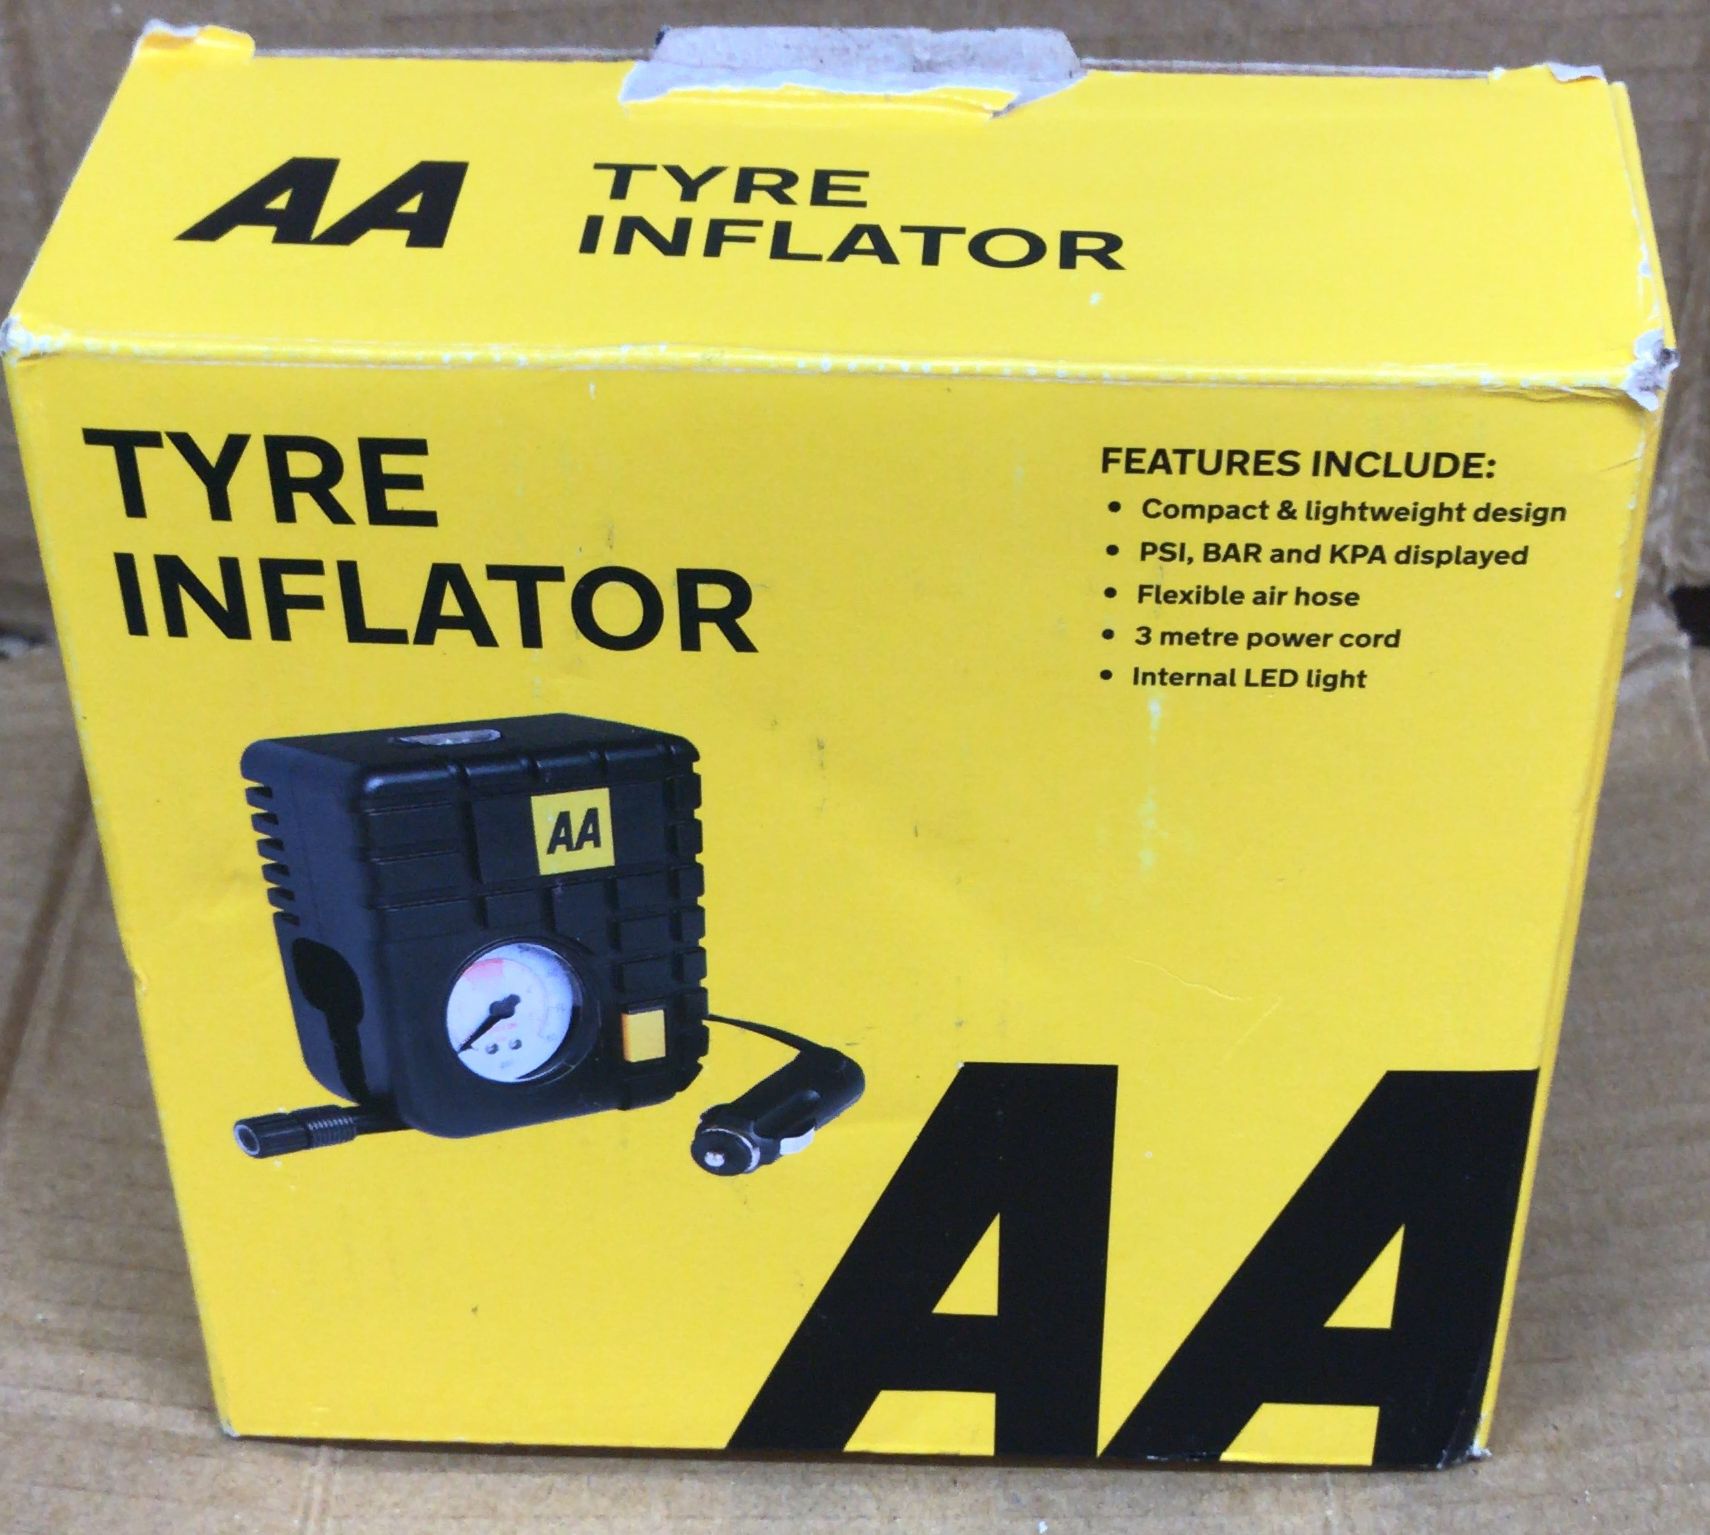 AA Car Essentials 12V Compact Tyre Inflator AA5007 – For Cars Vans Motorbikes Vehicles Inflatables Bicycles - PSI BAR KPA 0-80 PSI-5007